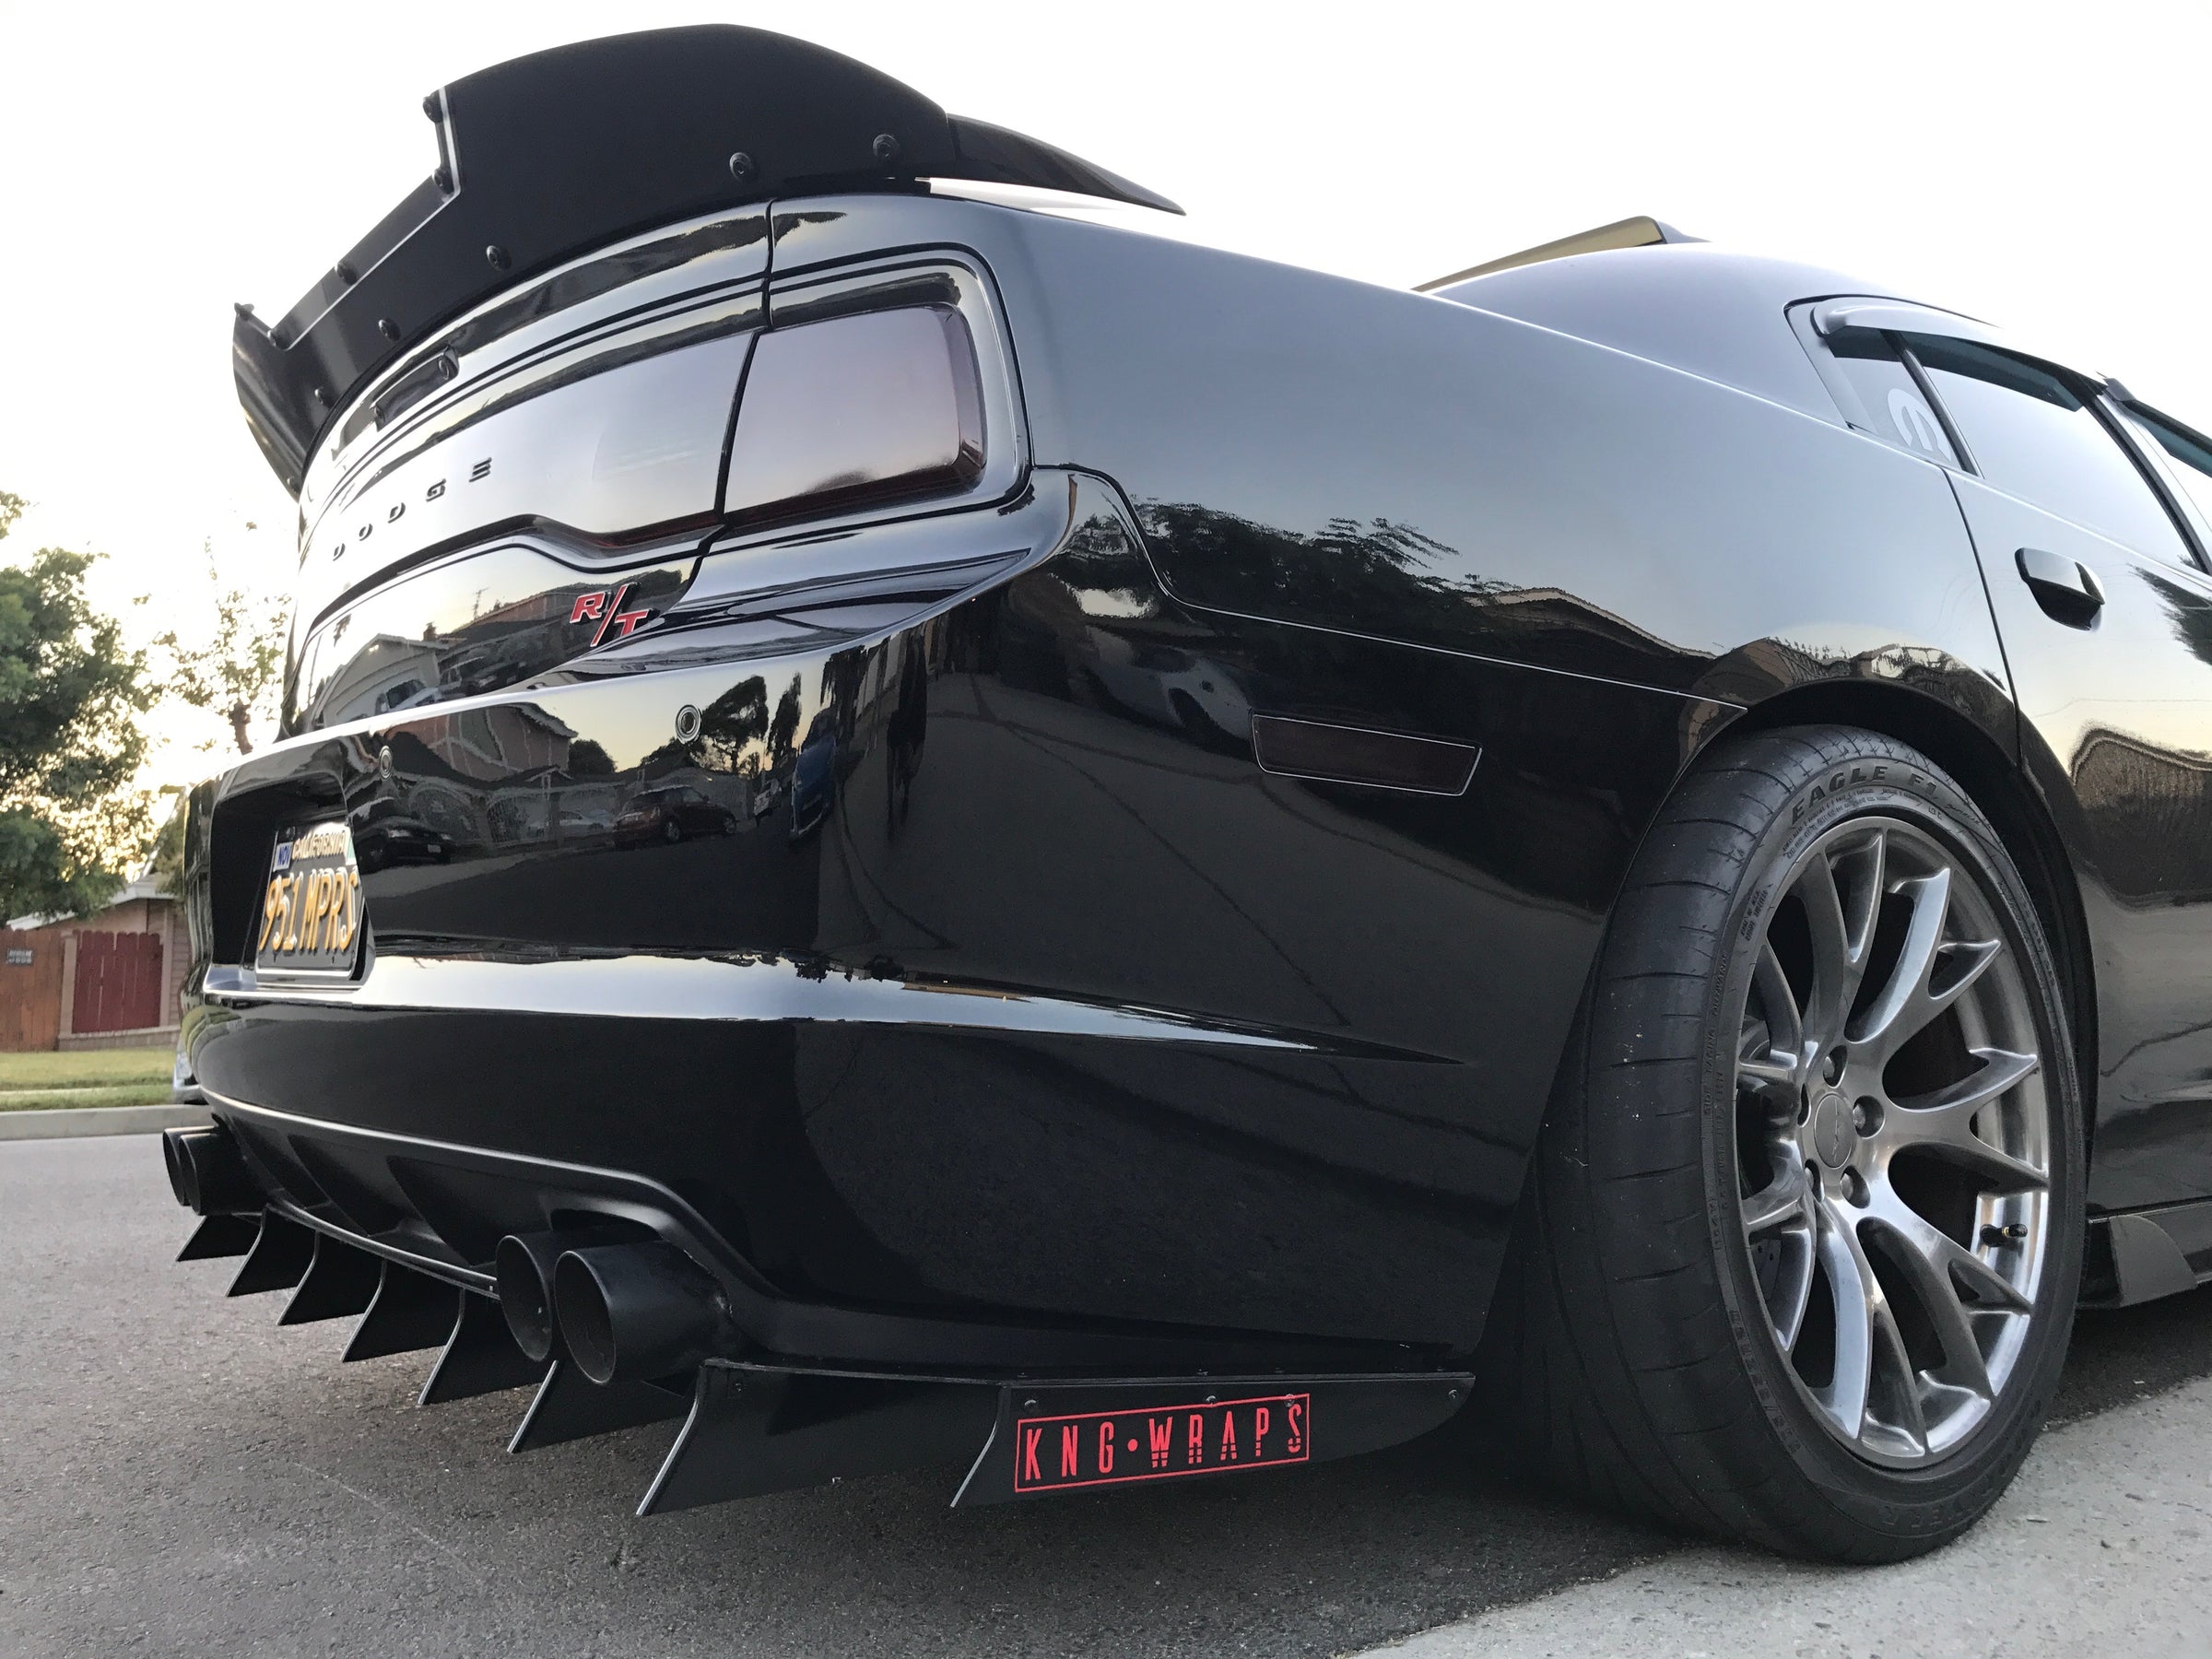 2014 Dodge Charger Rt Rear Diffuser How Much?